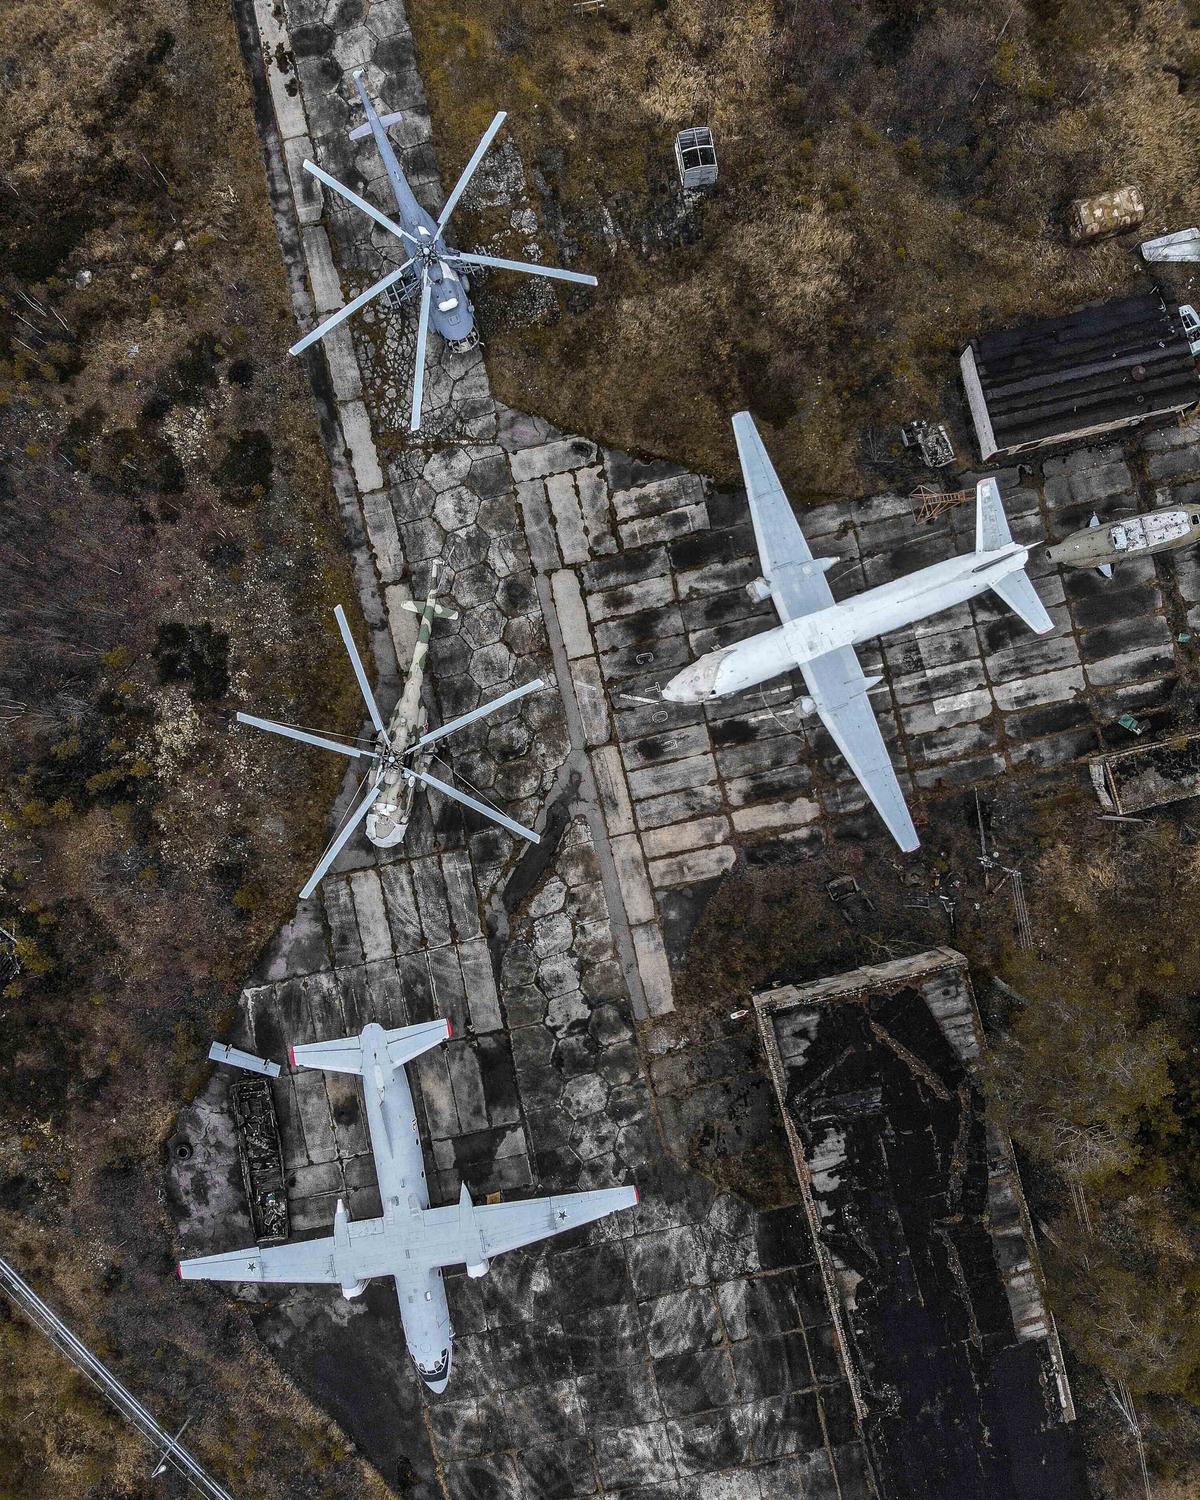 Decommissioned aircraft and helicopters on the territory of a military airfield in the Leningrad oblast. (Courtesy of Caters News)